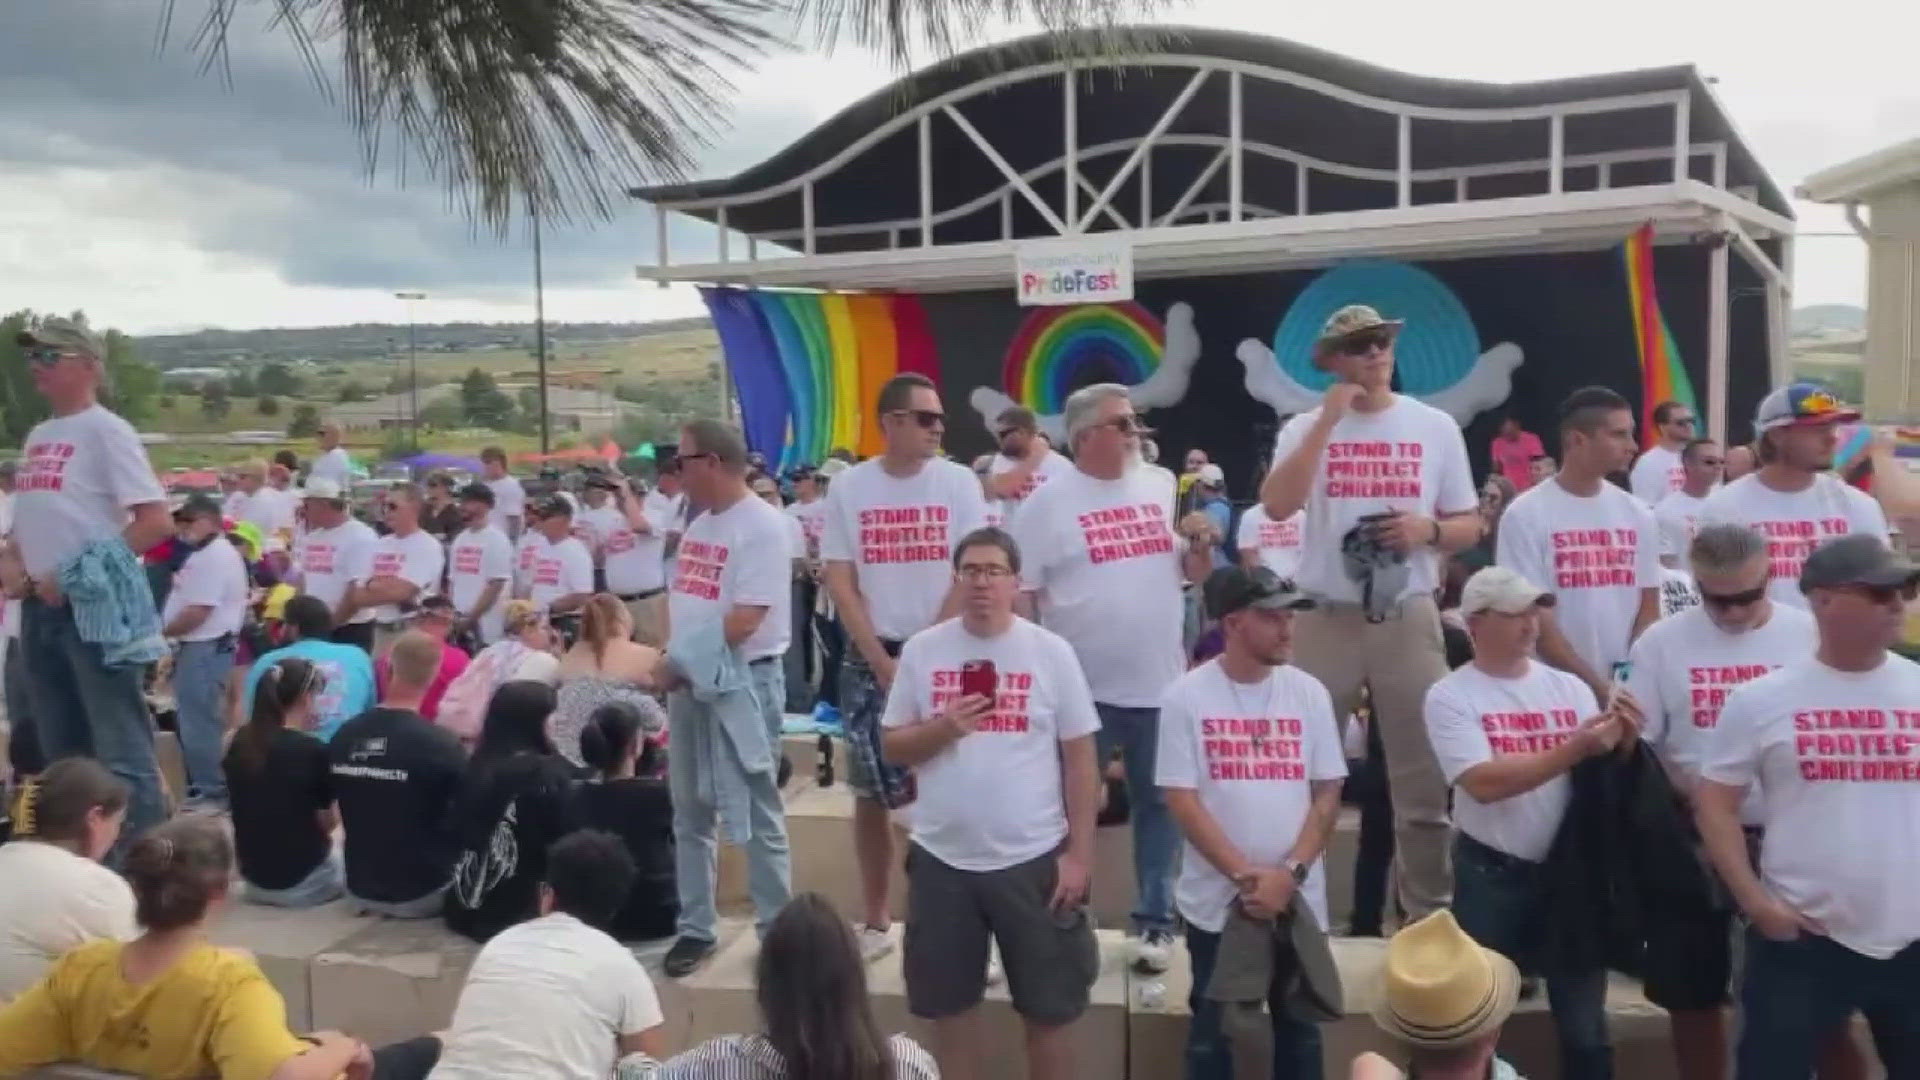 Last year, protesters gathered at the Douglas County PrideFest before a drag show. Witnesses said dozens of men tried to block the performance.